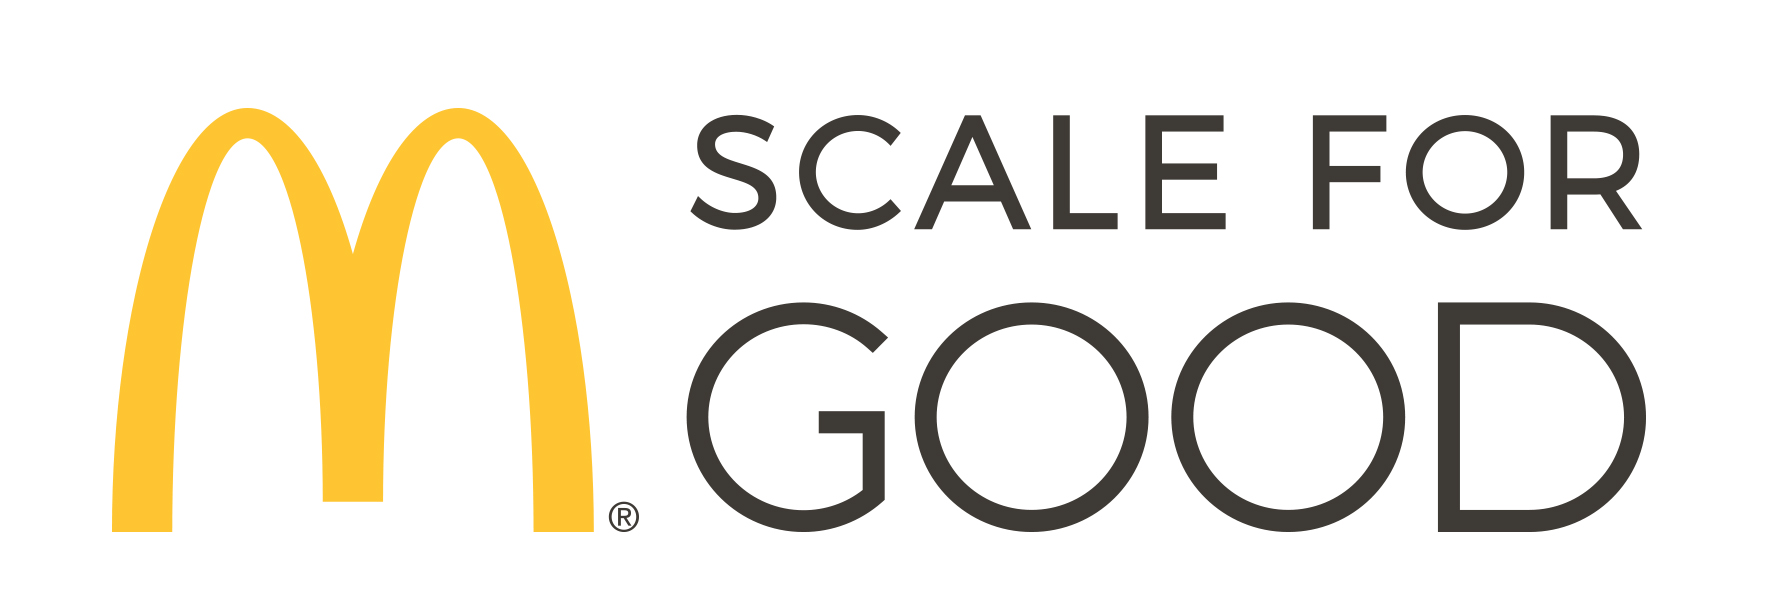 Scale for Good